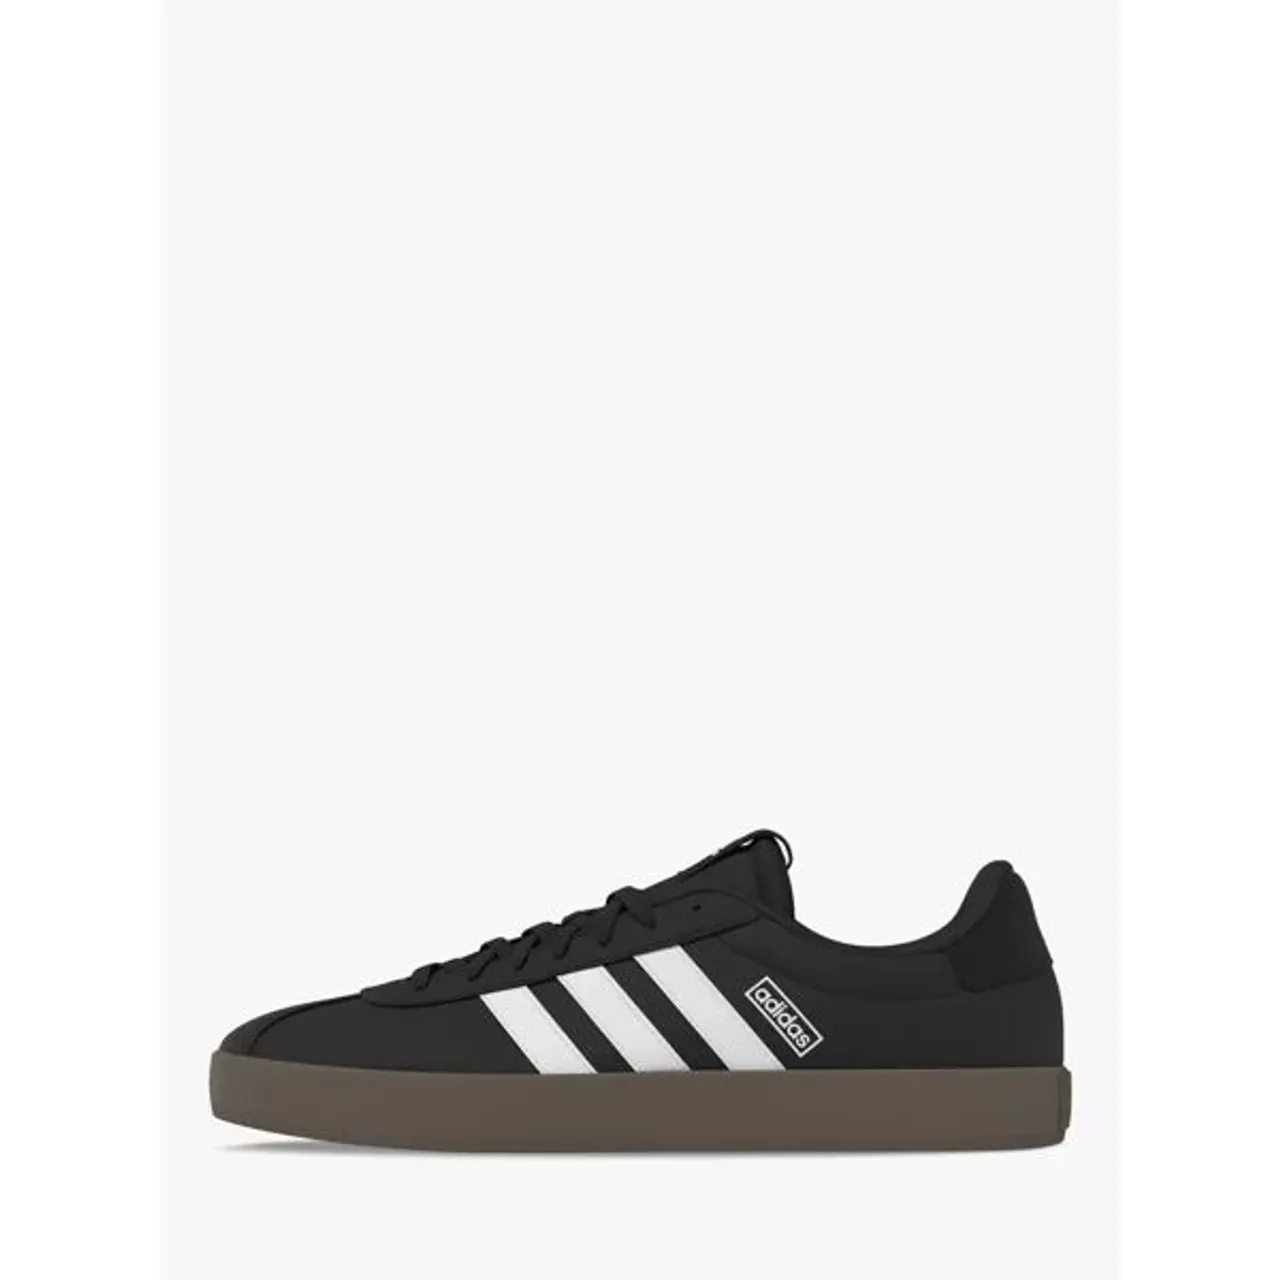 adidas VL Court Contrast Sole Trainers - Black/White - Female